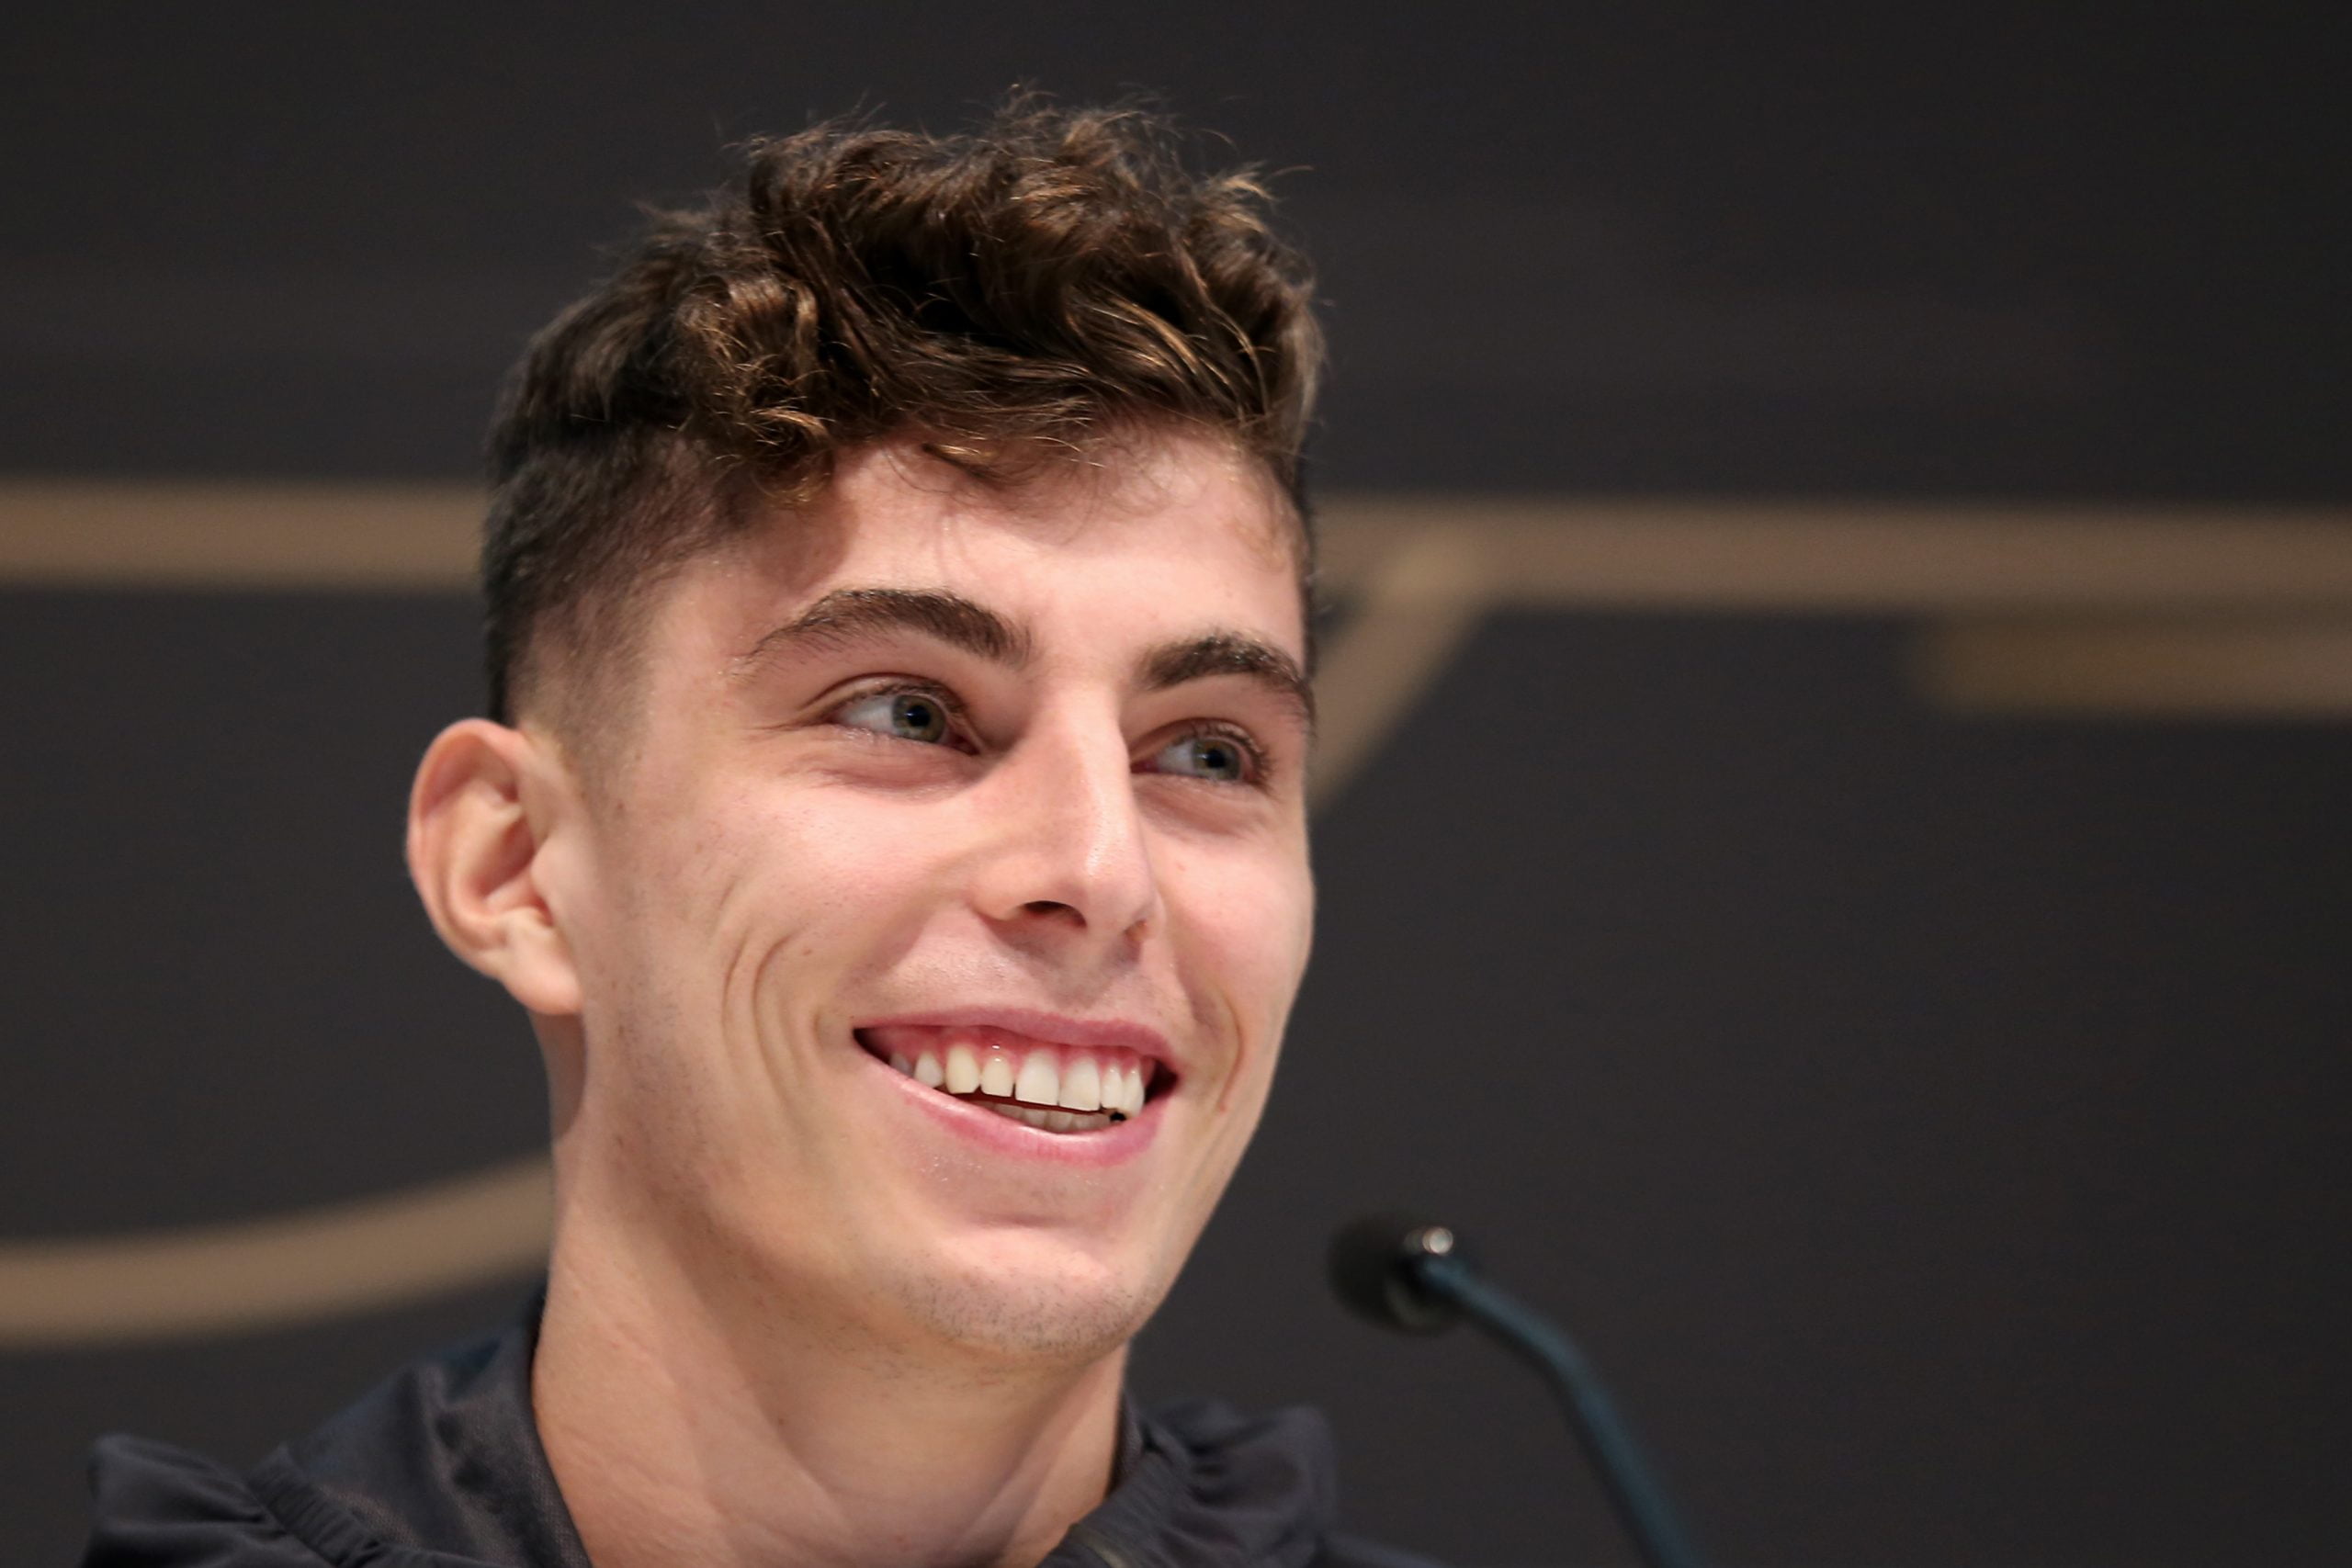 Kai Havertz of Germany speaks at a press conference at Deutsches Fussball Museum on October 11, 2019 in Dortmund, Germany. Germany will play against Estonia the UEFA Euro 2020 qualifier match on October 13, 2019 in Tallinn, Estonia. (Photo by Christof Koepsel/Bongarts/Getty Images)